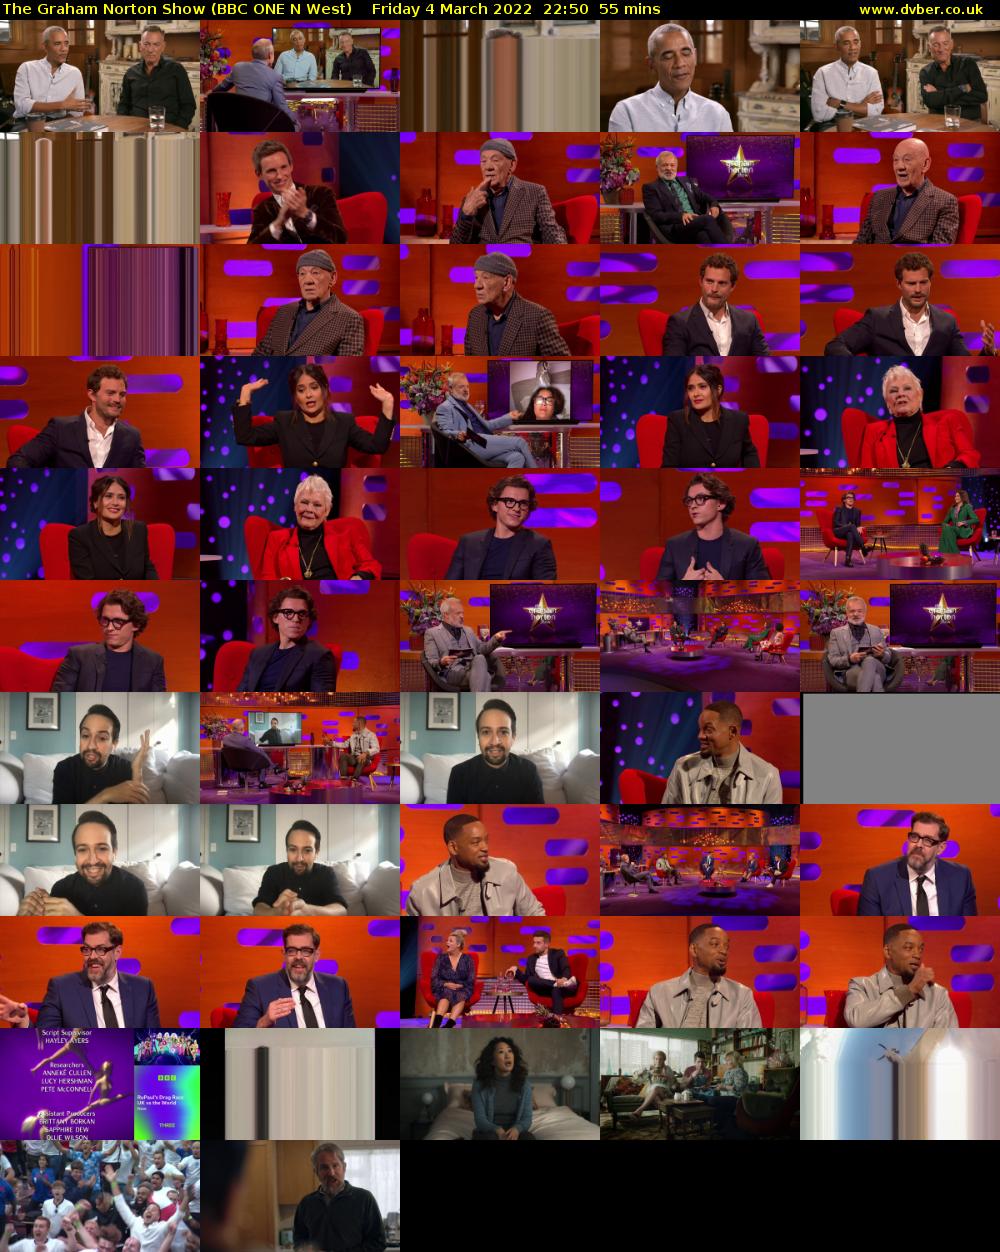 The Graham Norton Show (BBC ONE N West) Friday 4 March 2022 22:50 - 23:45